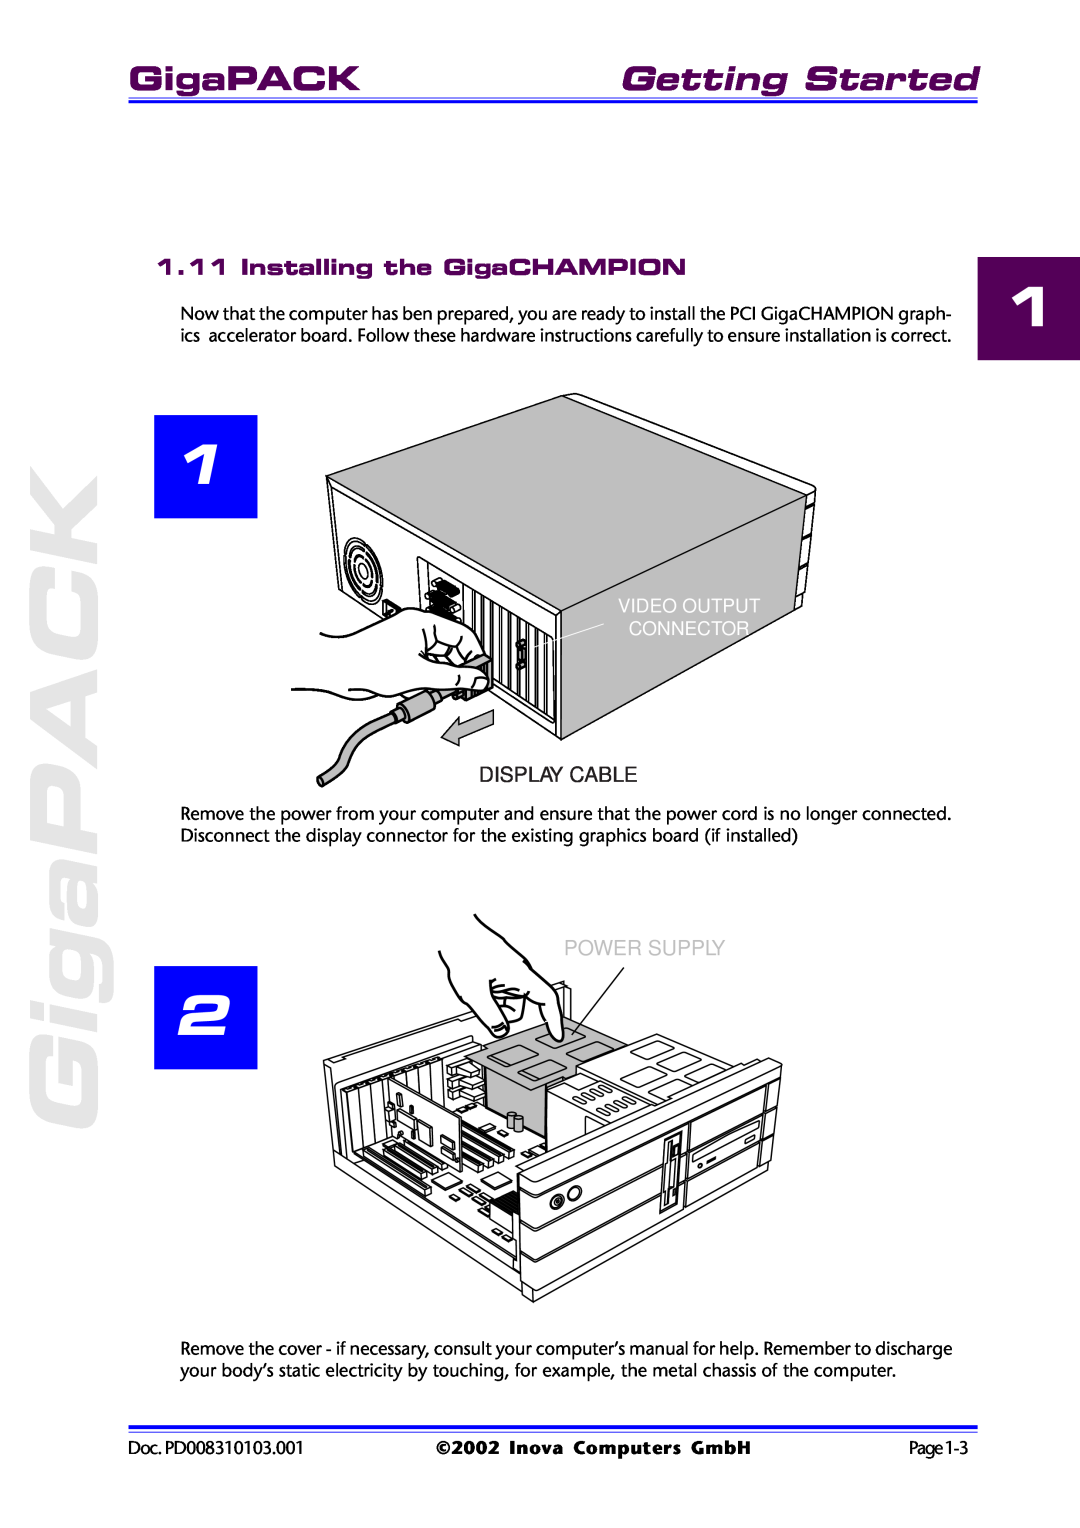 Inova PD008310103.001 AB user manual GigaPACK, Getting Started, Installing the GigaCHAMPION, Display Cable, Power Supply 